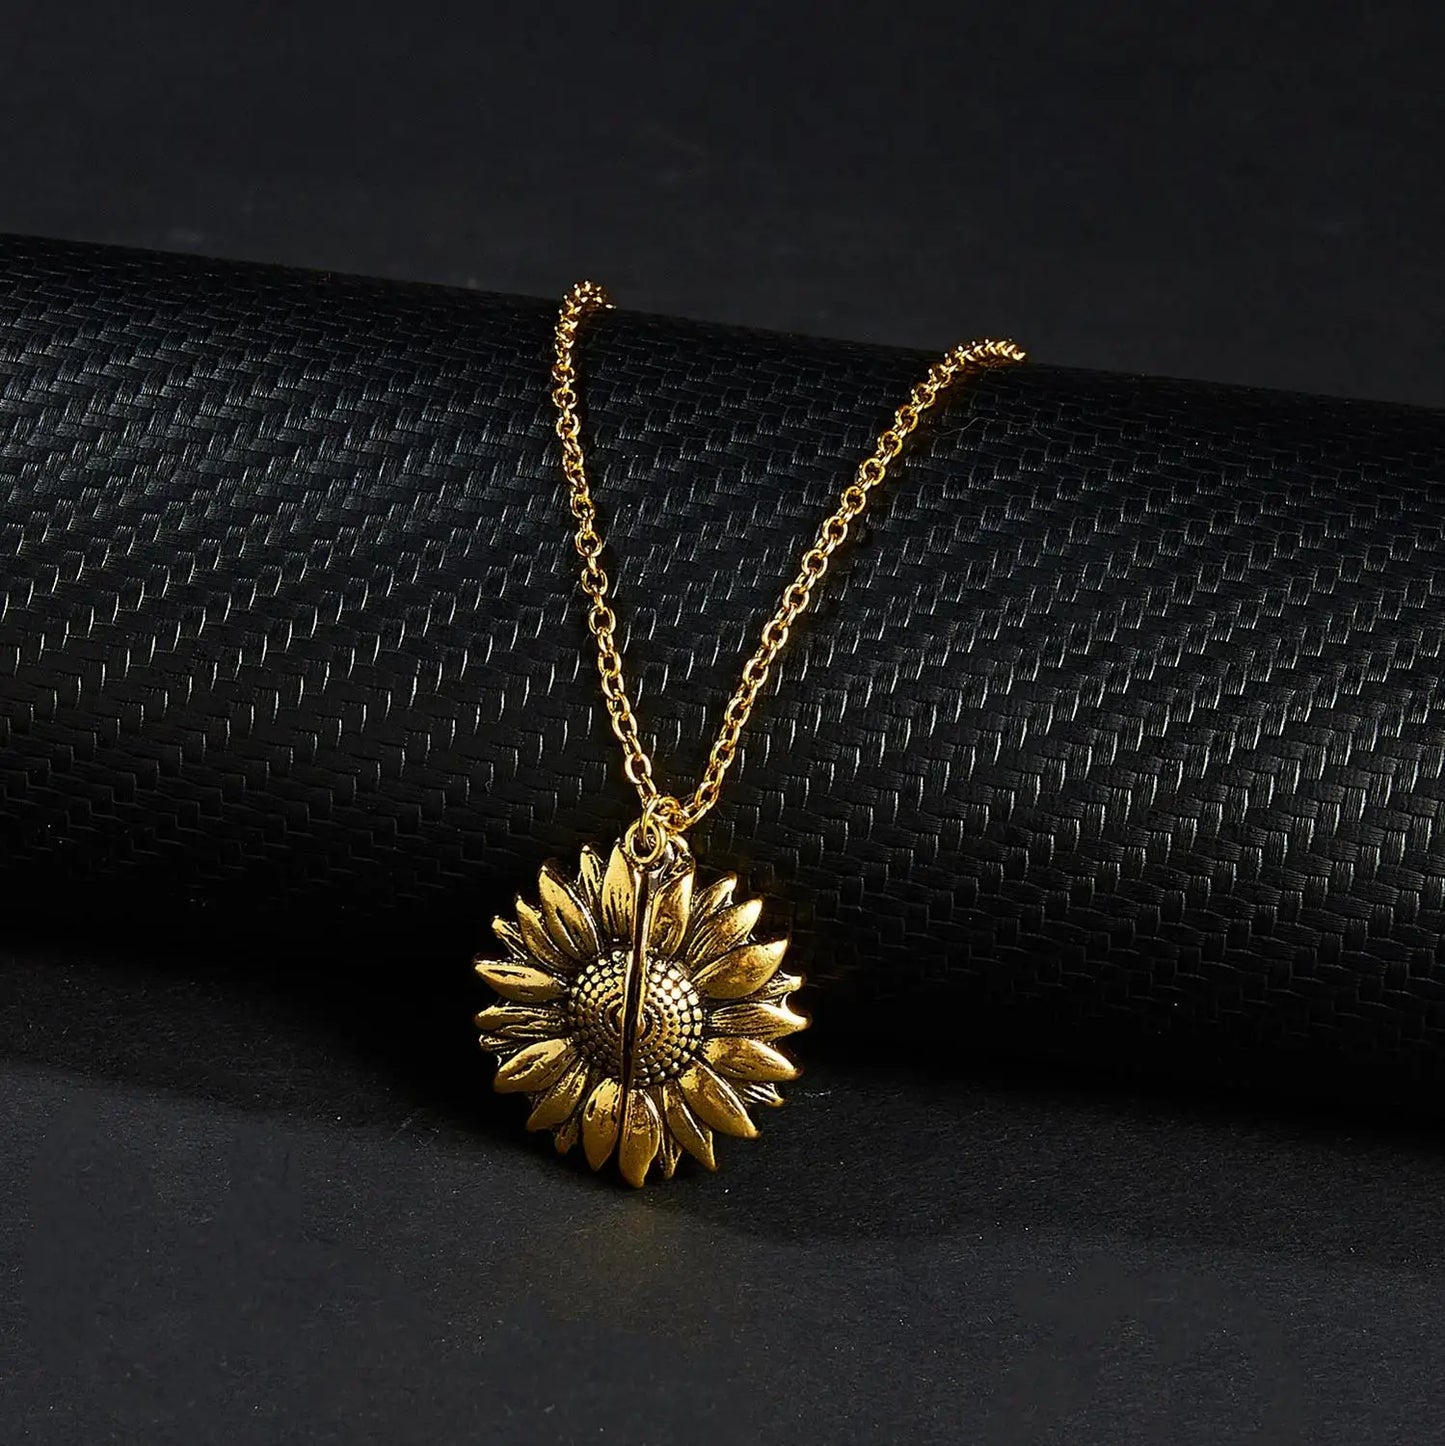 You are my sunshine Vintage Sunflower pendant Double-layer Open Necklace